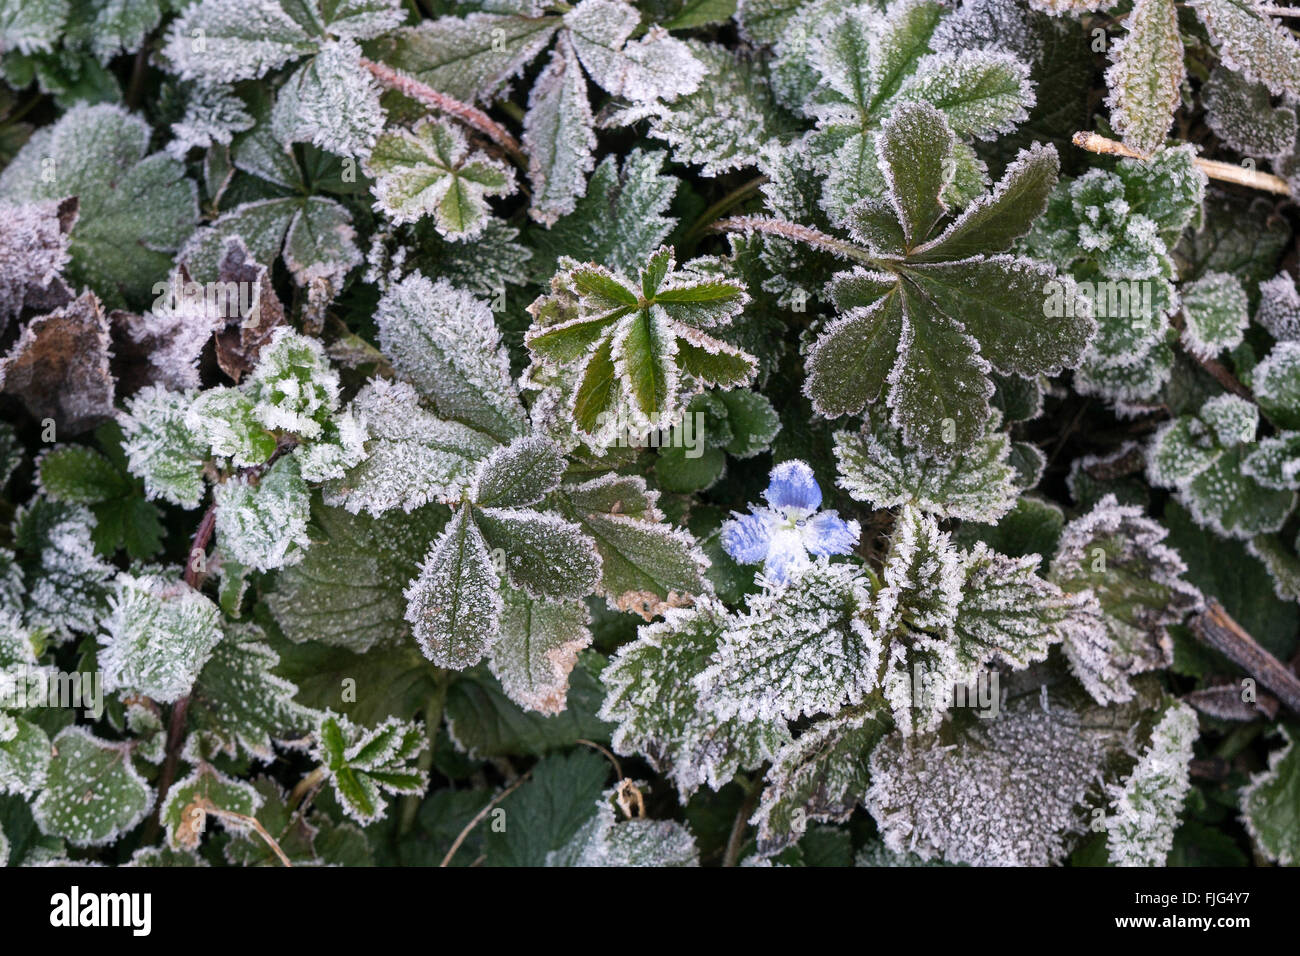 Groundcover, plants covered with hoarfrost, Baden-Württemberg, Germany Stock Photo